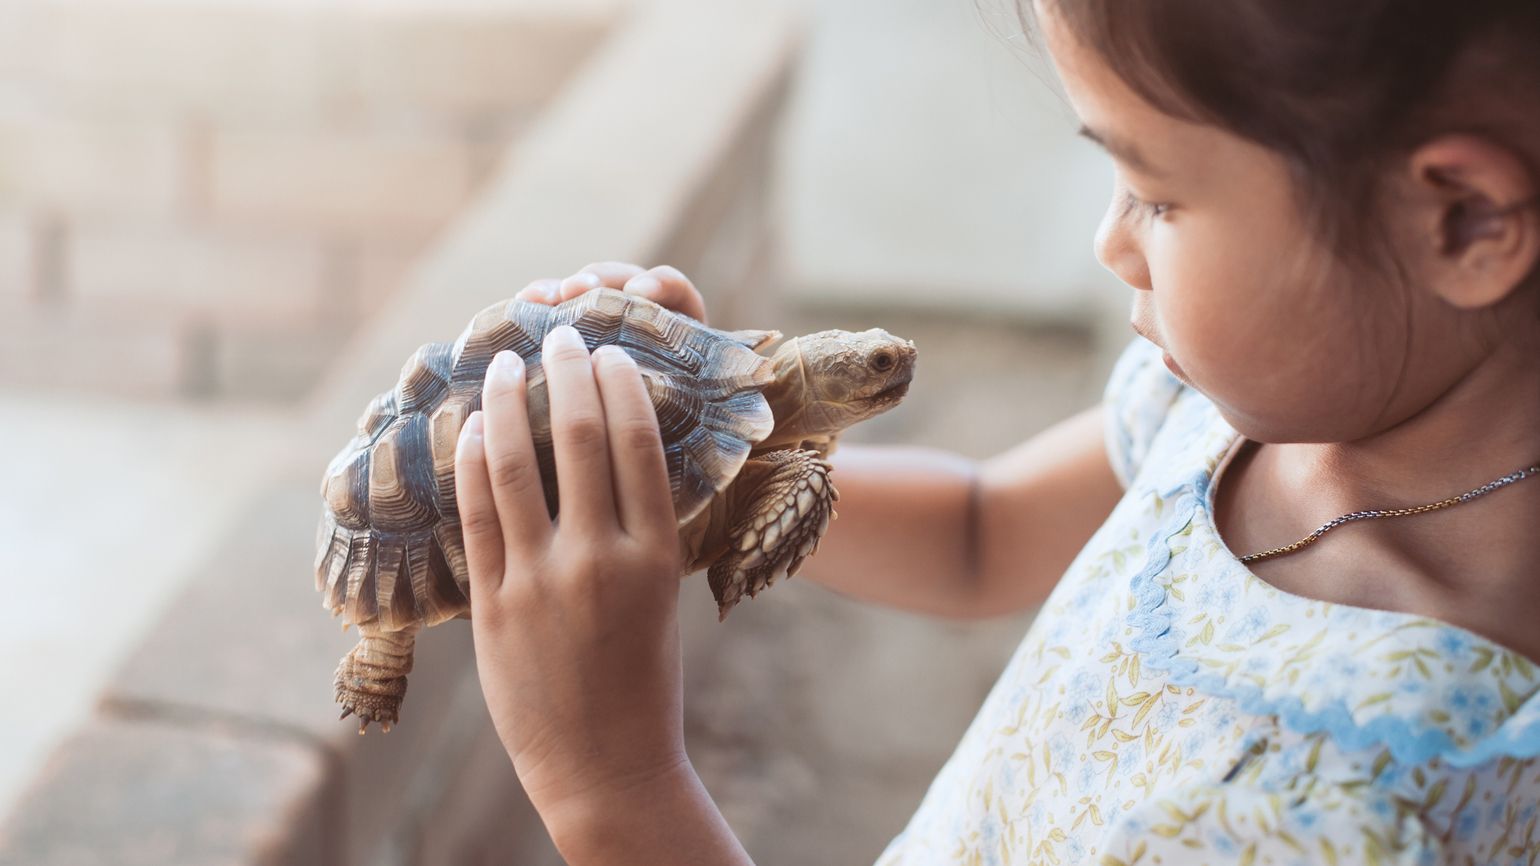 A young Asian girl with her pet turtle.